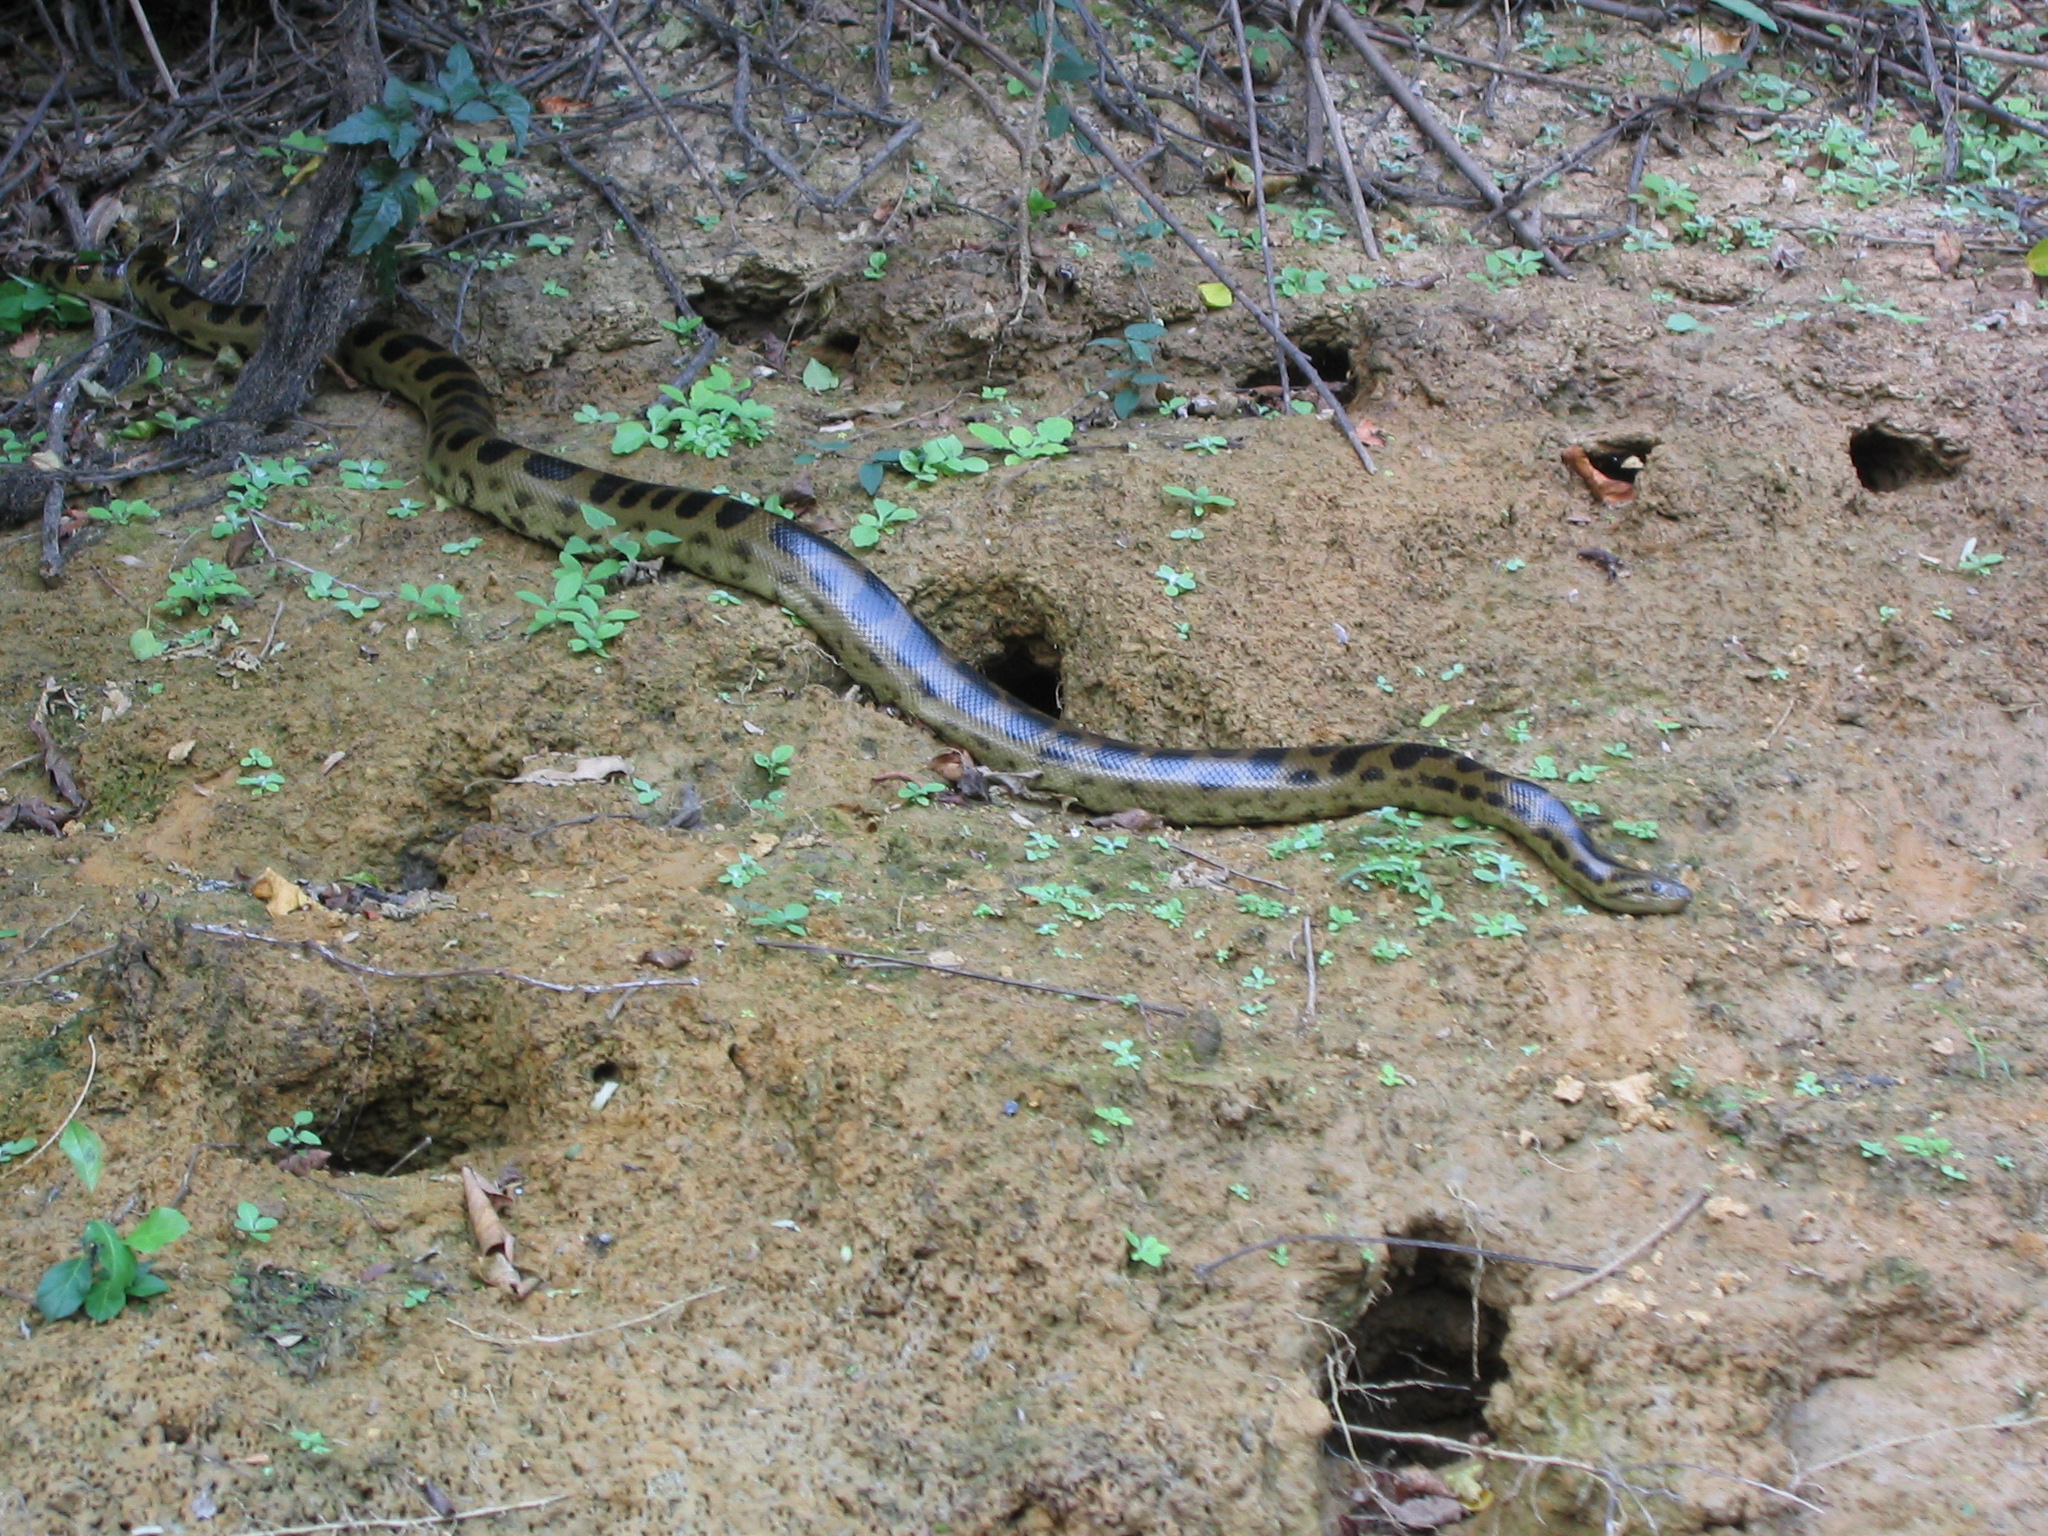 a brown snake that is on the ground